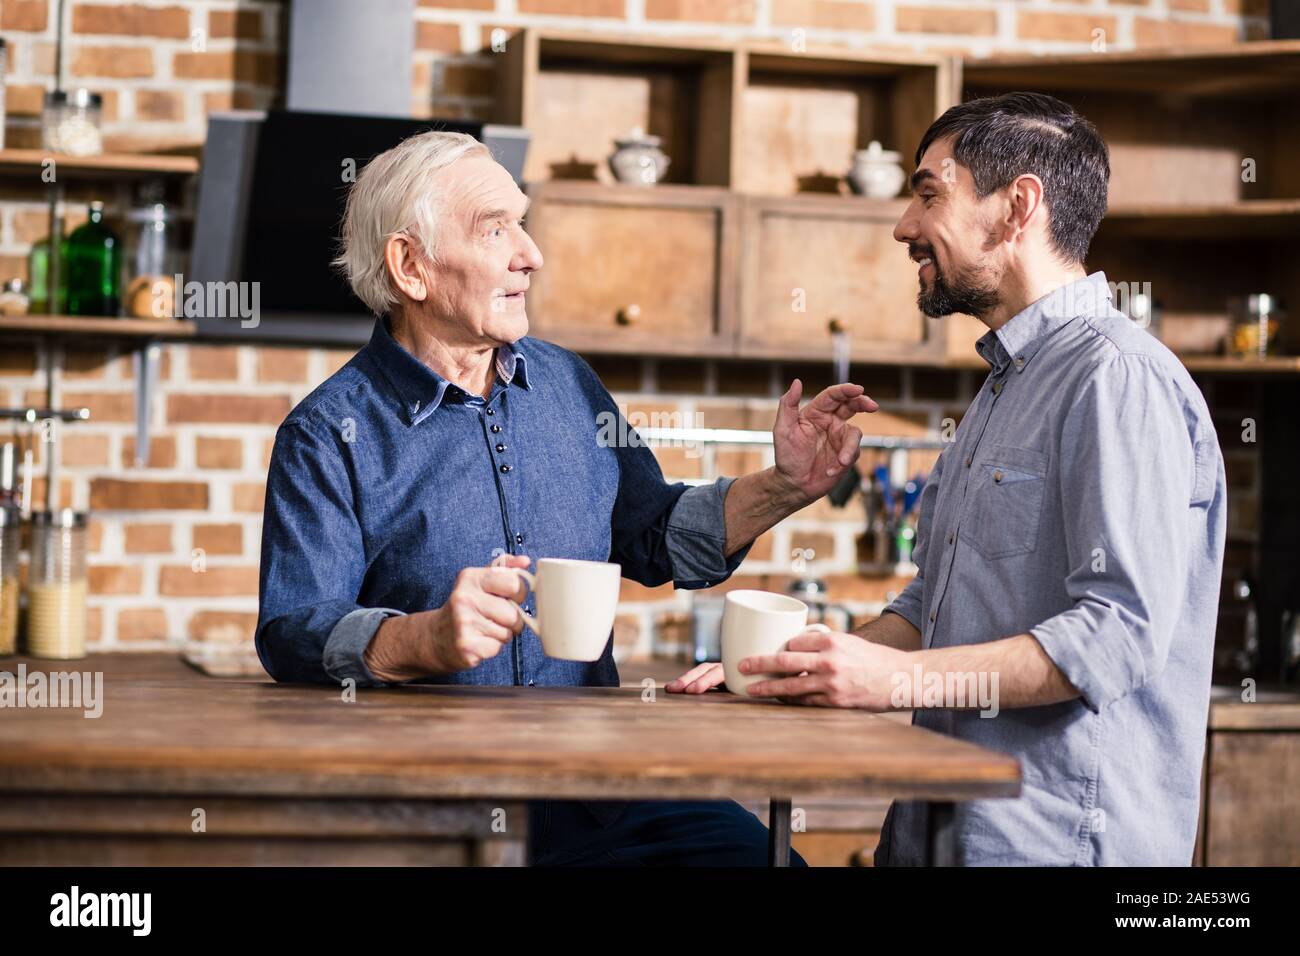 Pleasant aged man having a conversation with his son Stock Photo